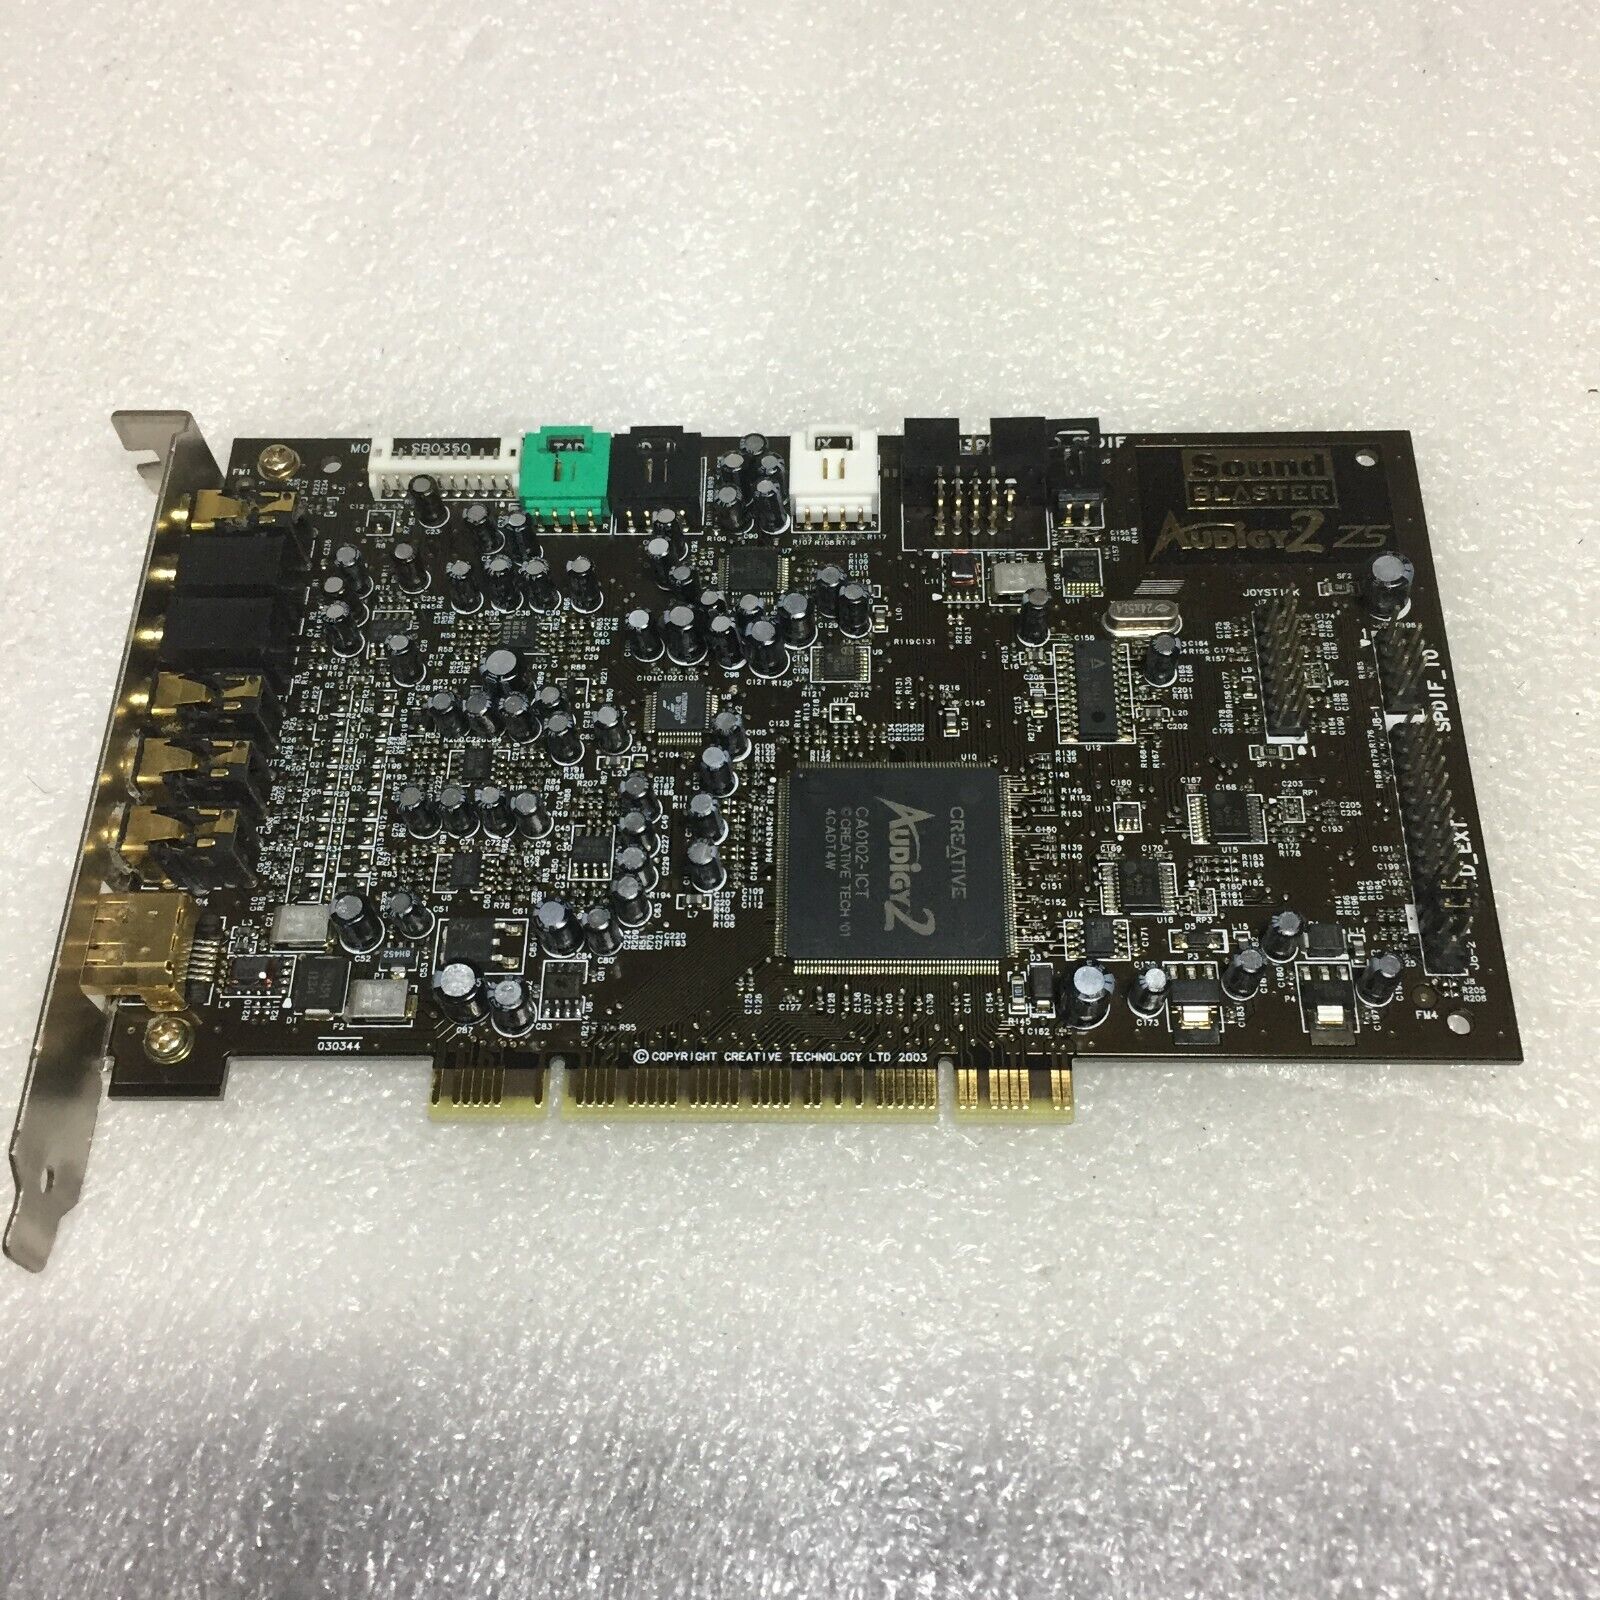 Creative Sound Blaster Audigy 2 PCI SB0350 Sound Card. Available Now for $19.99